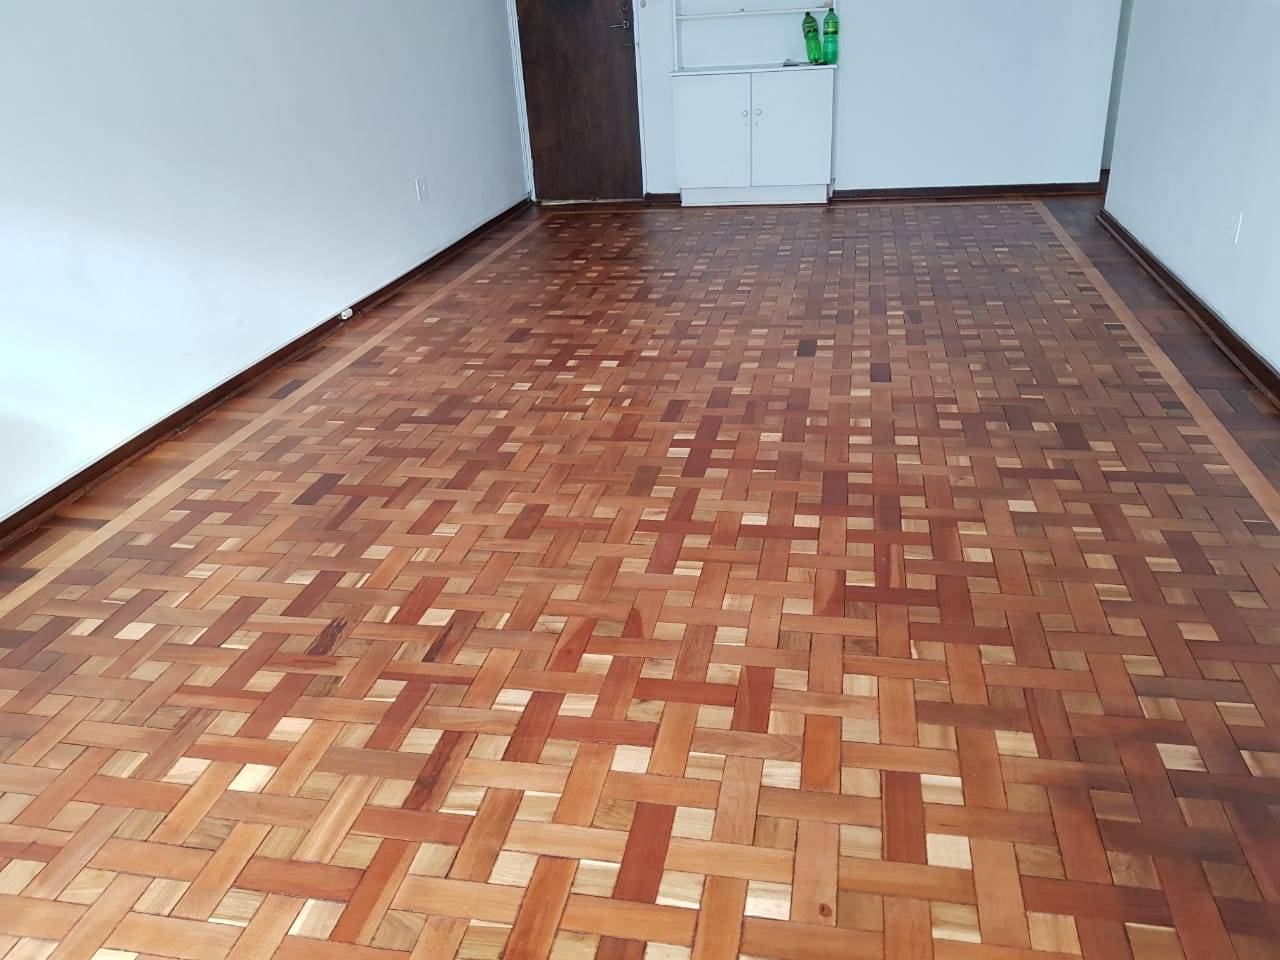 Thanks to team we did another great job at noth beach Durban for Peter we can help you as well to make your floors look amazing 